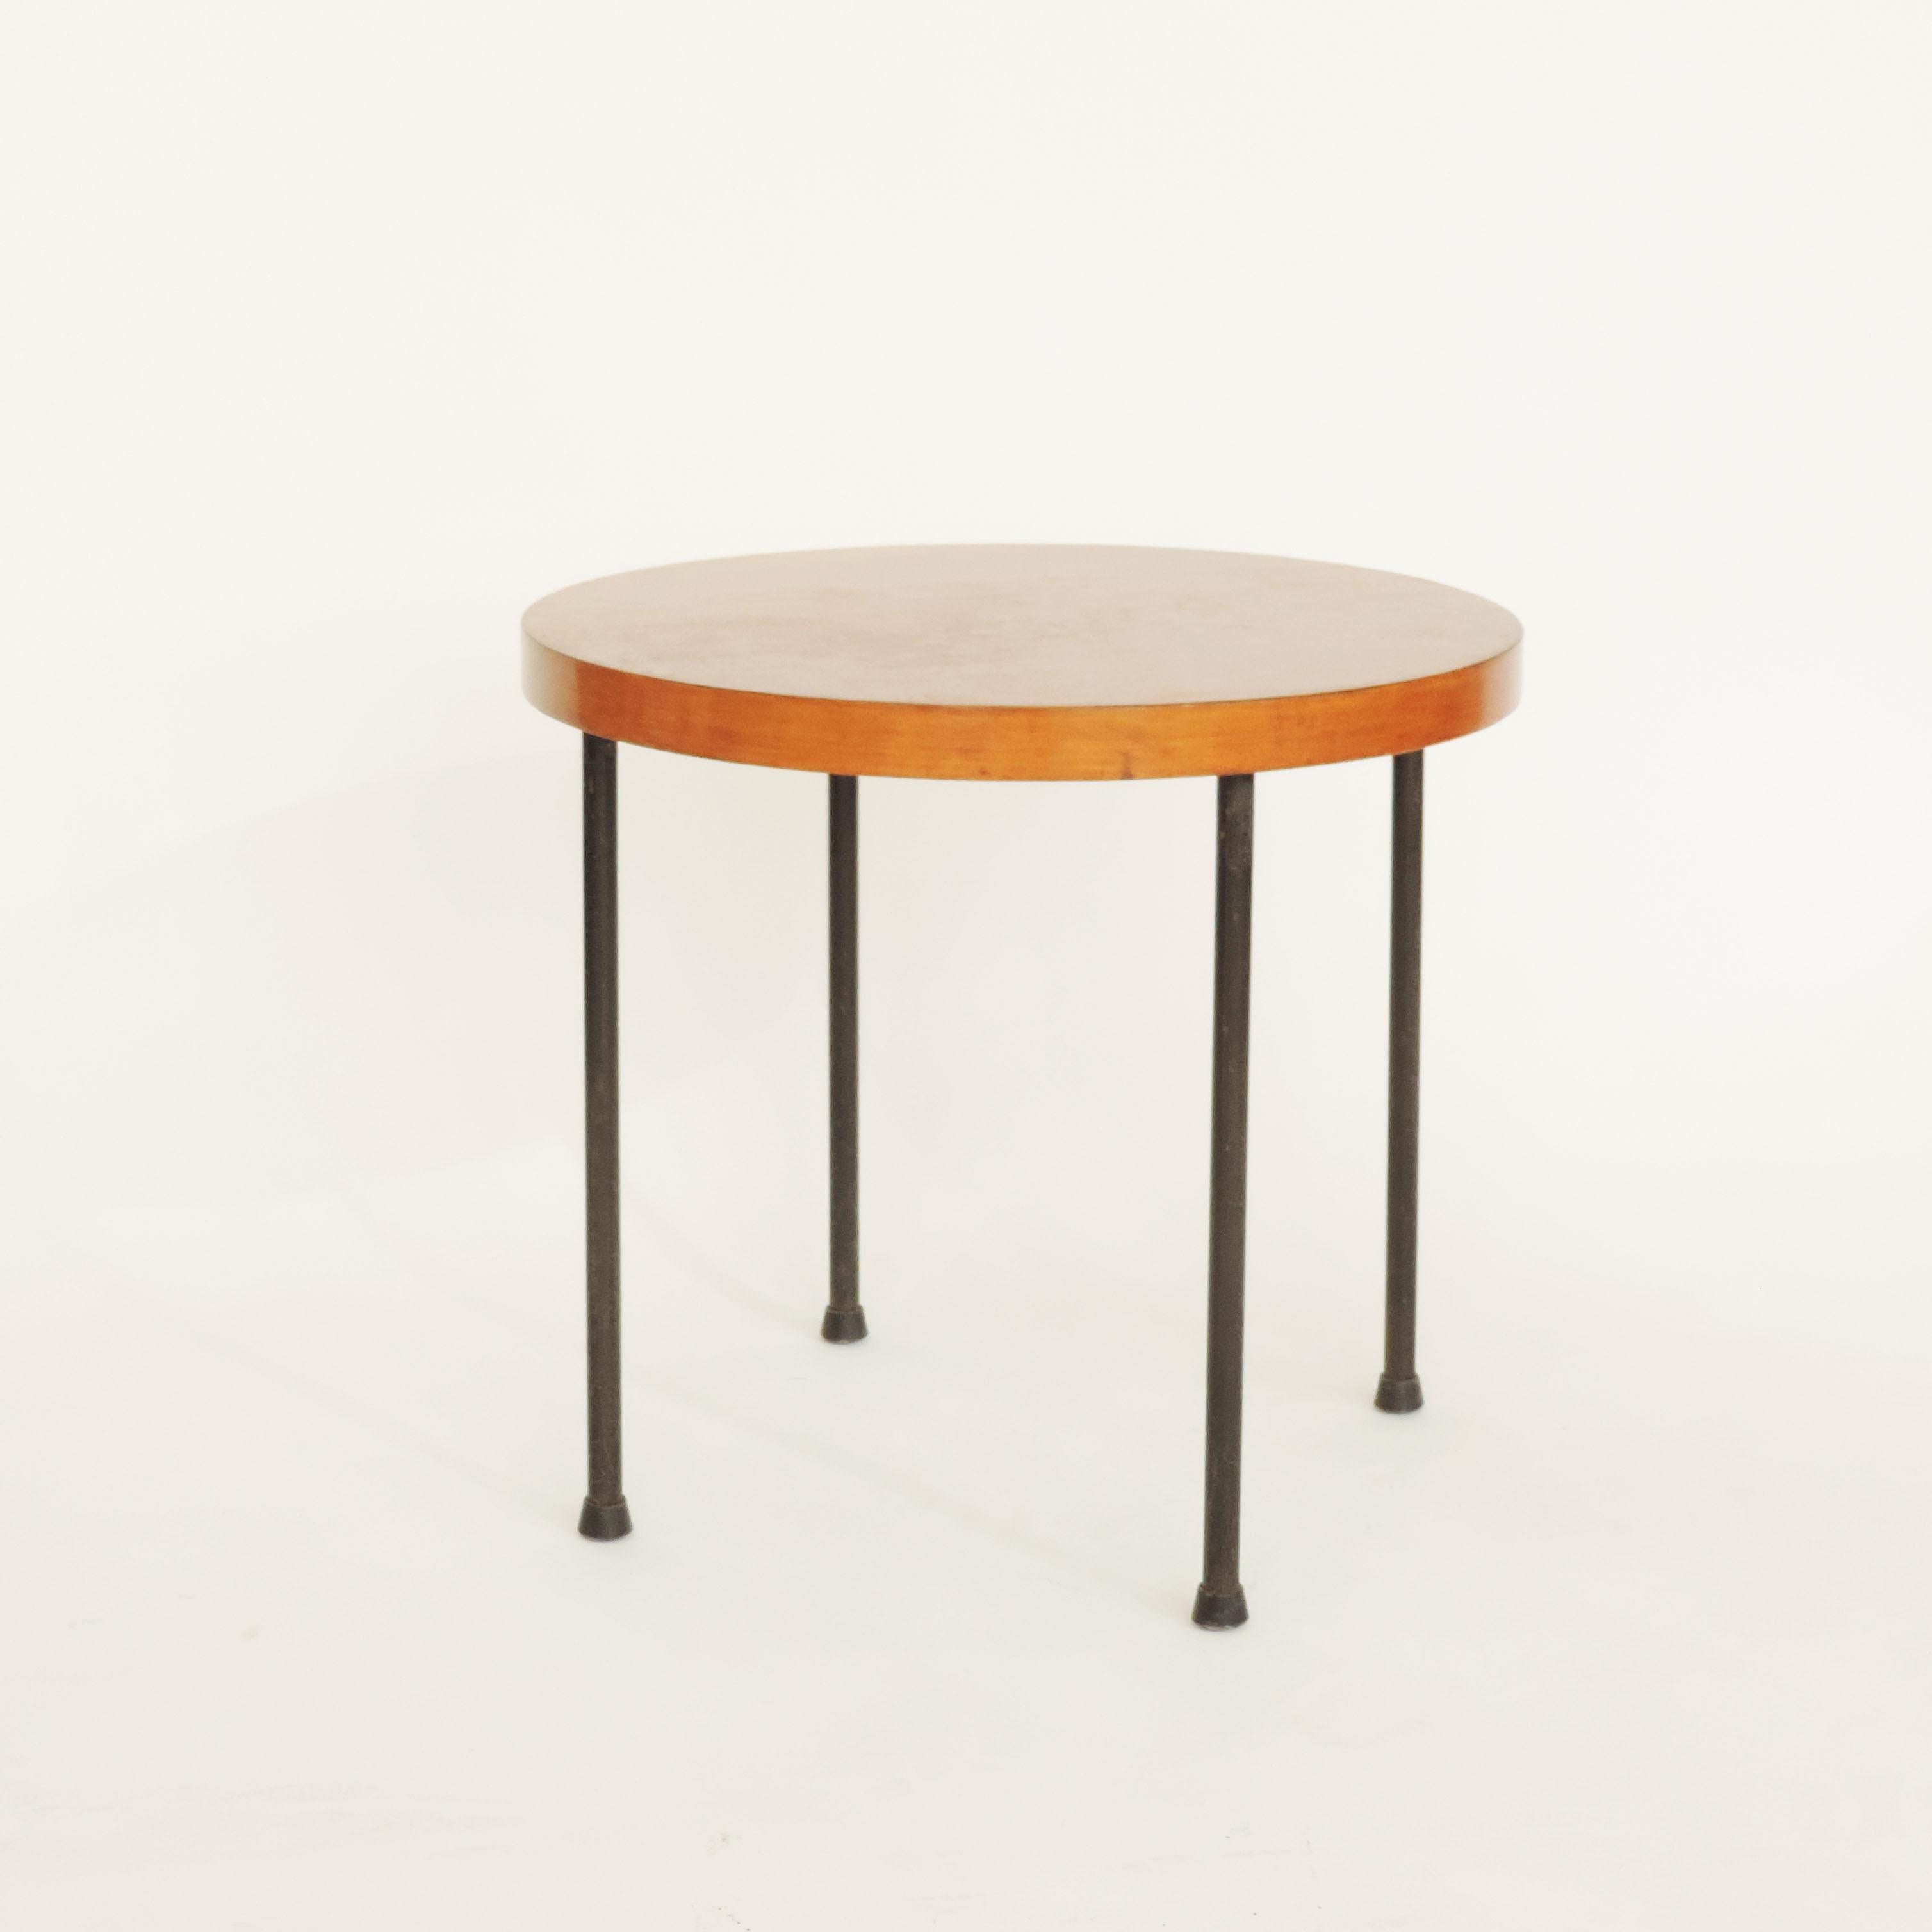 Mid-20th Century Set of Three Wood and Metal Side Tables France or Italy, 1950s For Sale